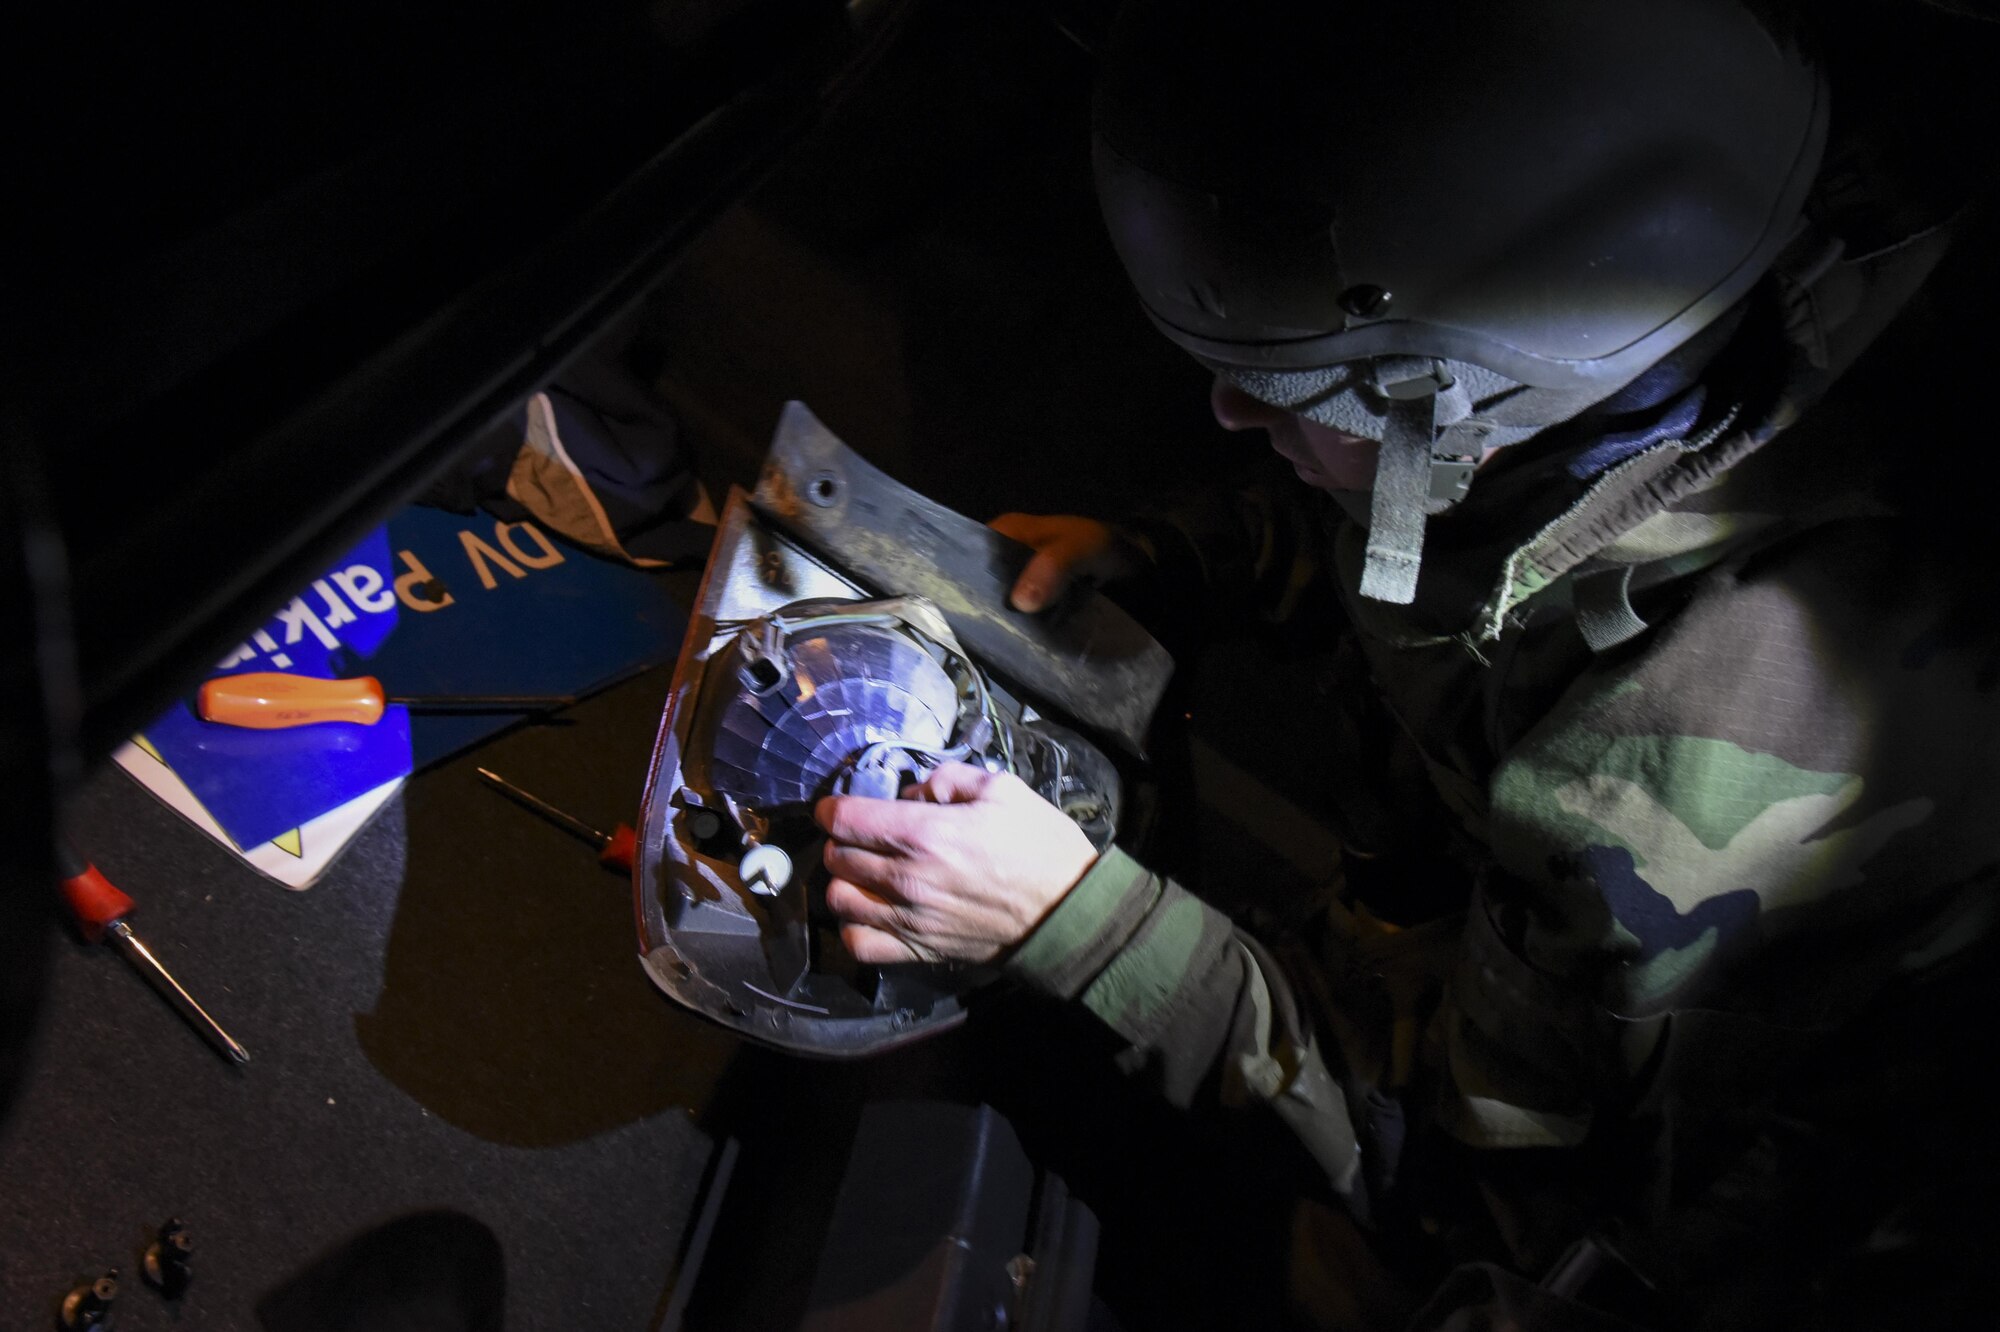 U.S. Air Force Airman 1st Class Michael Lubick, 8th Logistics Readiness Squadron fire truck and refueller mechanic, removes a bulb from a taillight during exercise Beverly Pack 17-2, a no-notice training exercise at Kunsan Air Base, Republic of Korea, March 7, 2017. Lubick is responsible for maintaining vehicles to ensure airmen can perform their daily tasks in support of the 8th Fighter Wing mission. (U.S. Air Force photo by Senior Airman Michael Hunsaker/Released)